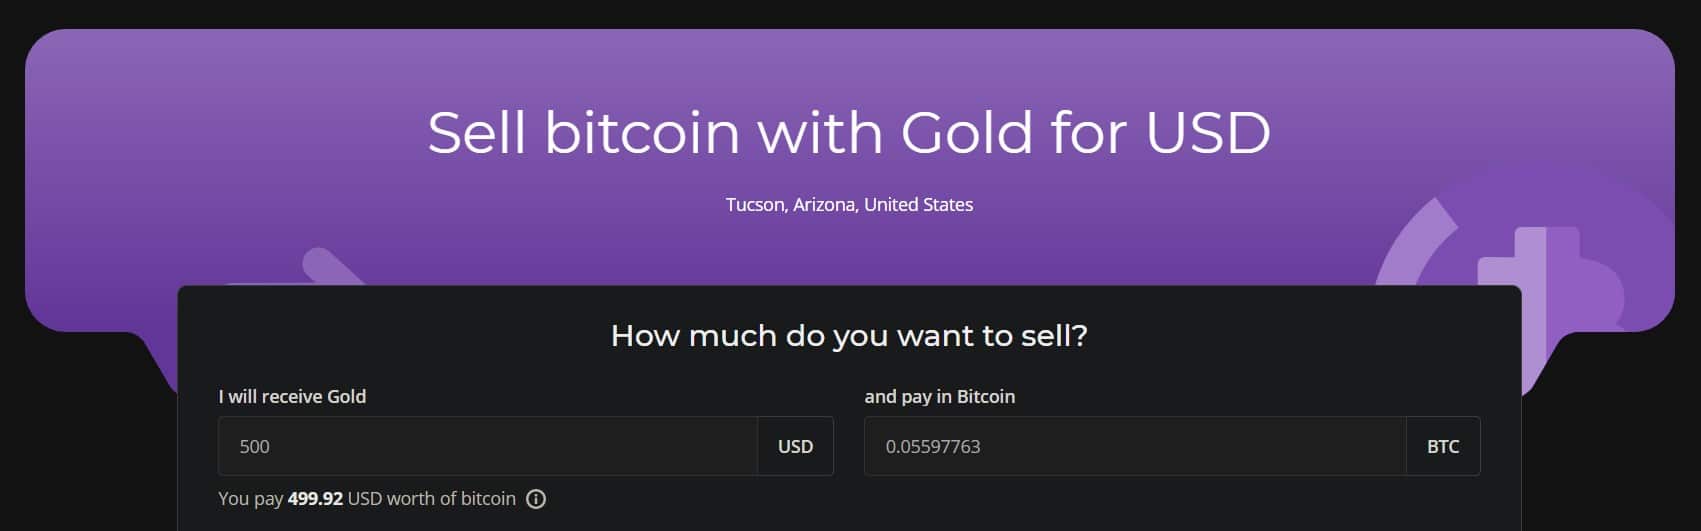 paxful- sell bitcoin for gold